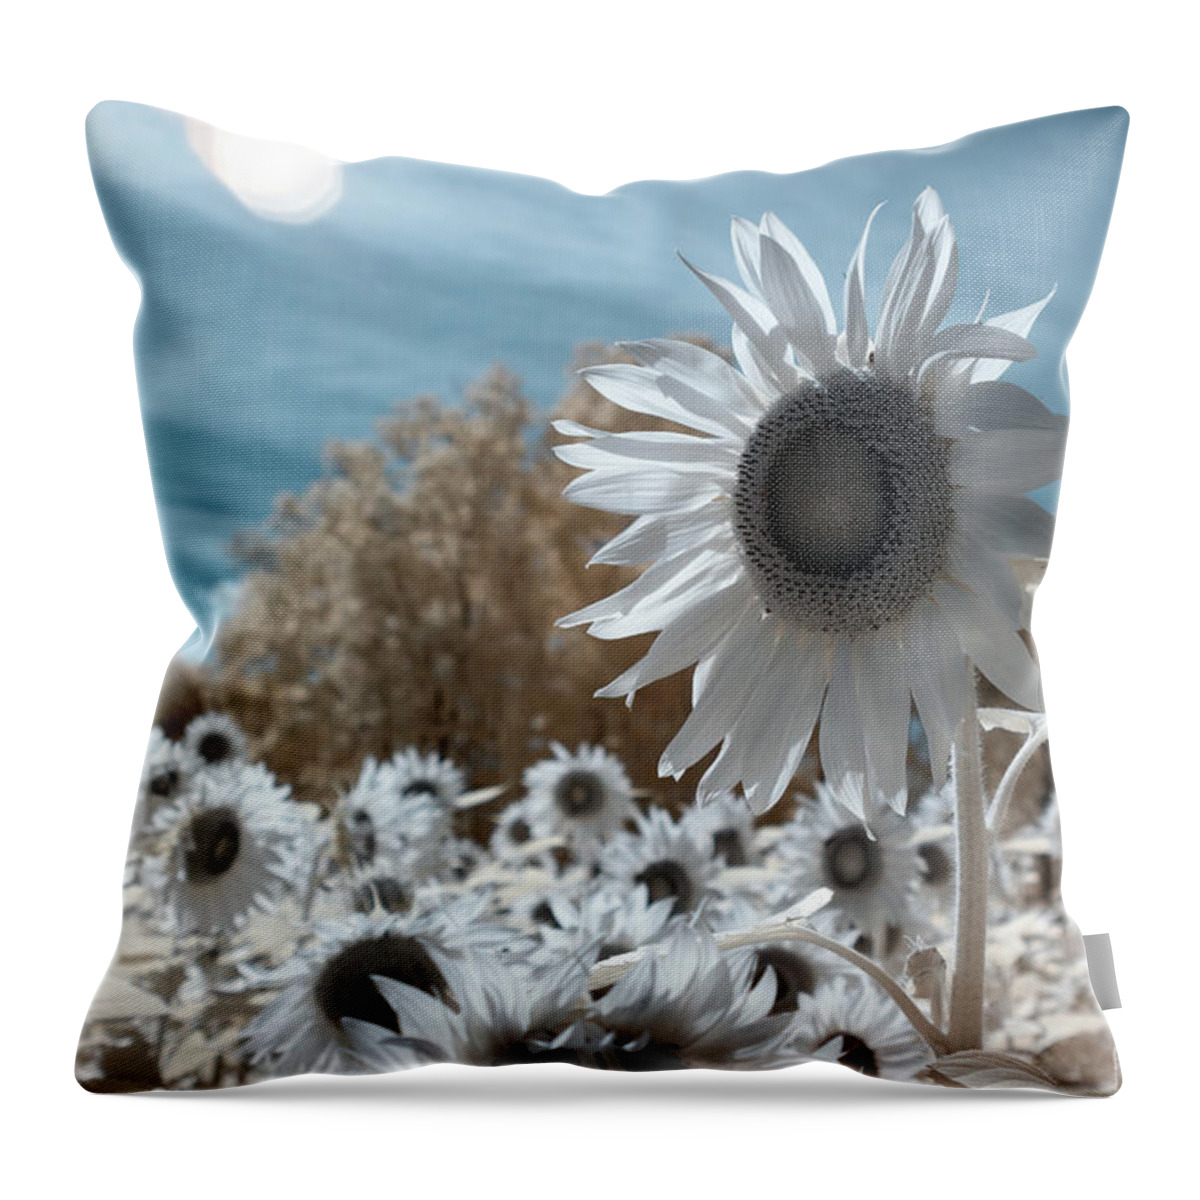 Ir Infra Red Infrared Waelength Outside Outdoors Nature Natural Sky Flower Flowers Botany Sun Sunflower Sunflowers 720nm 720 Nanometers Nanometer Brian Hale Brianhalephoto Farm Throw Pillow featuring the photograph Sunflower Infrared by Brian Hale